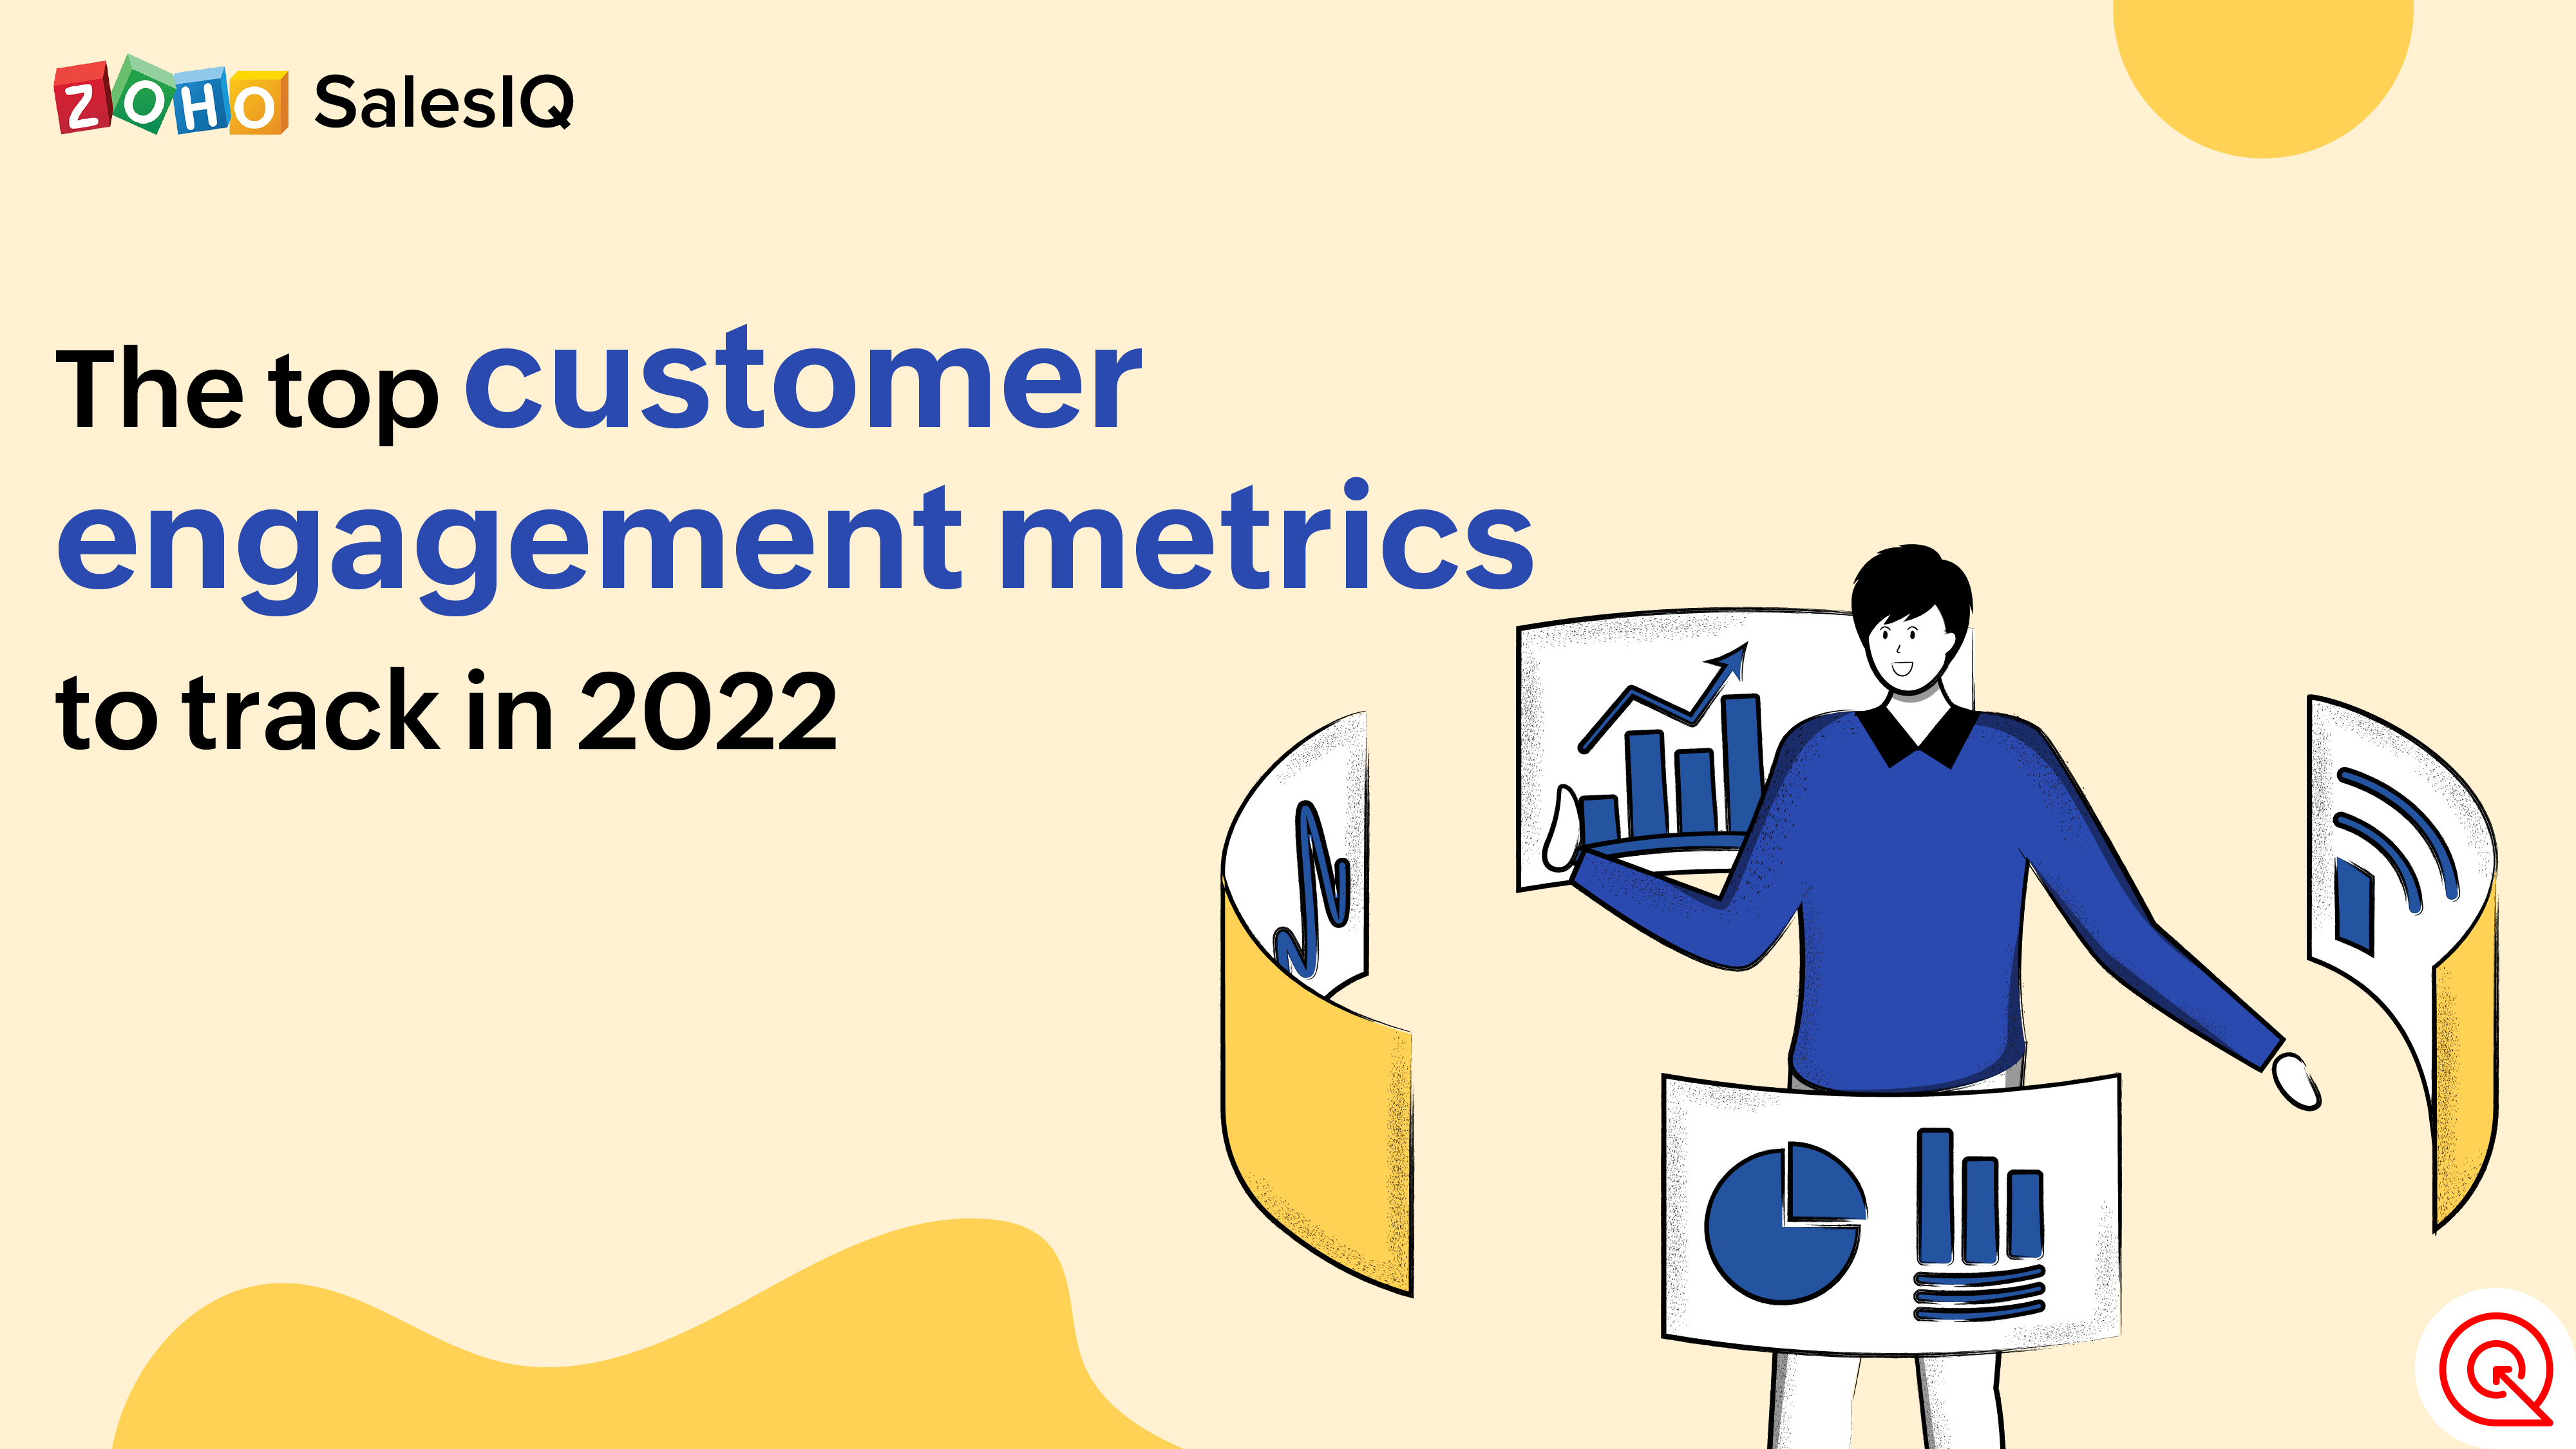 The top customer engagement metrics to track in 2022